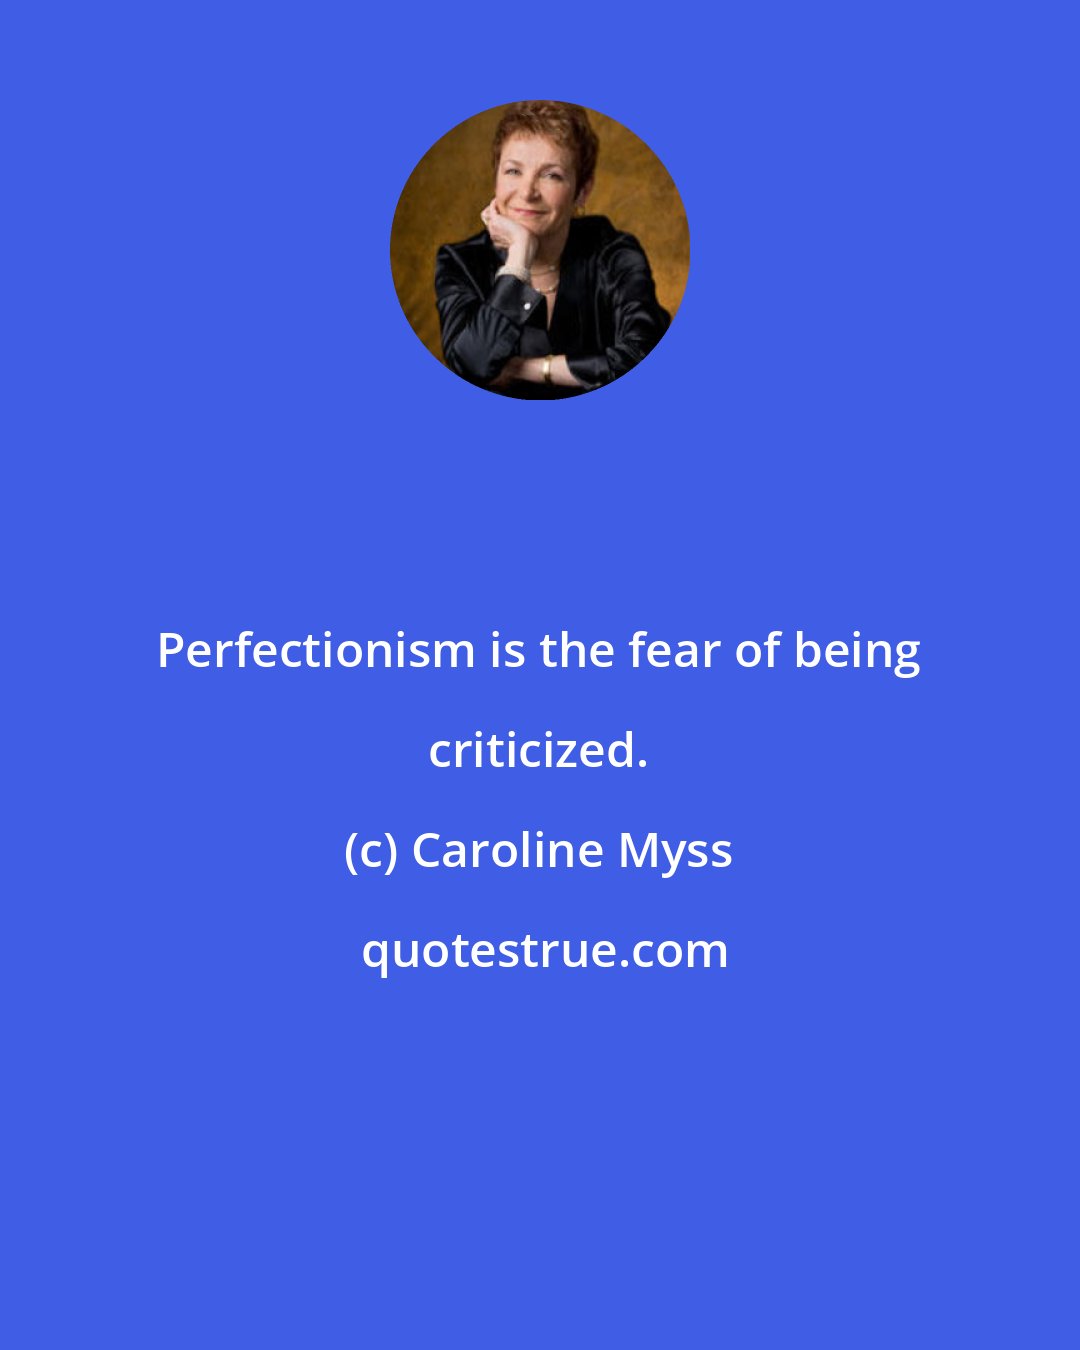 Caroline Myss: Perfectionism is the fear of being criticized.